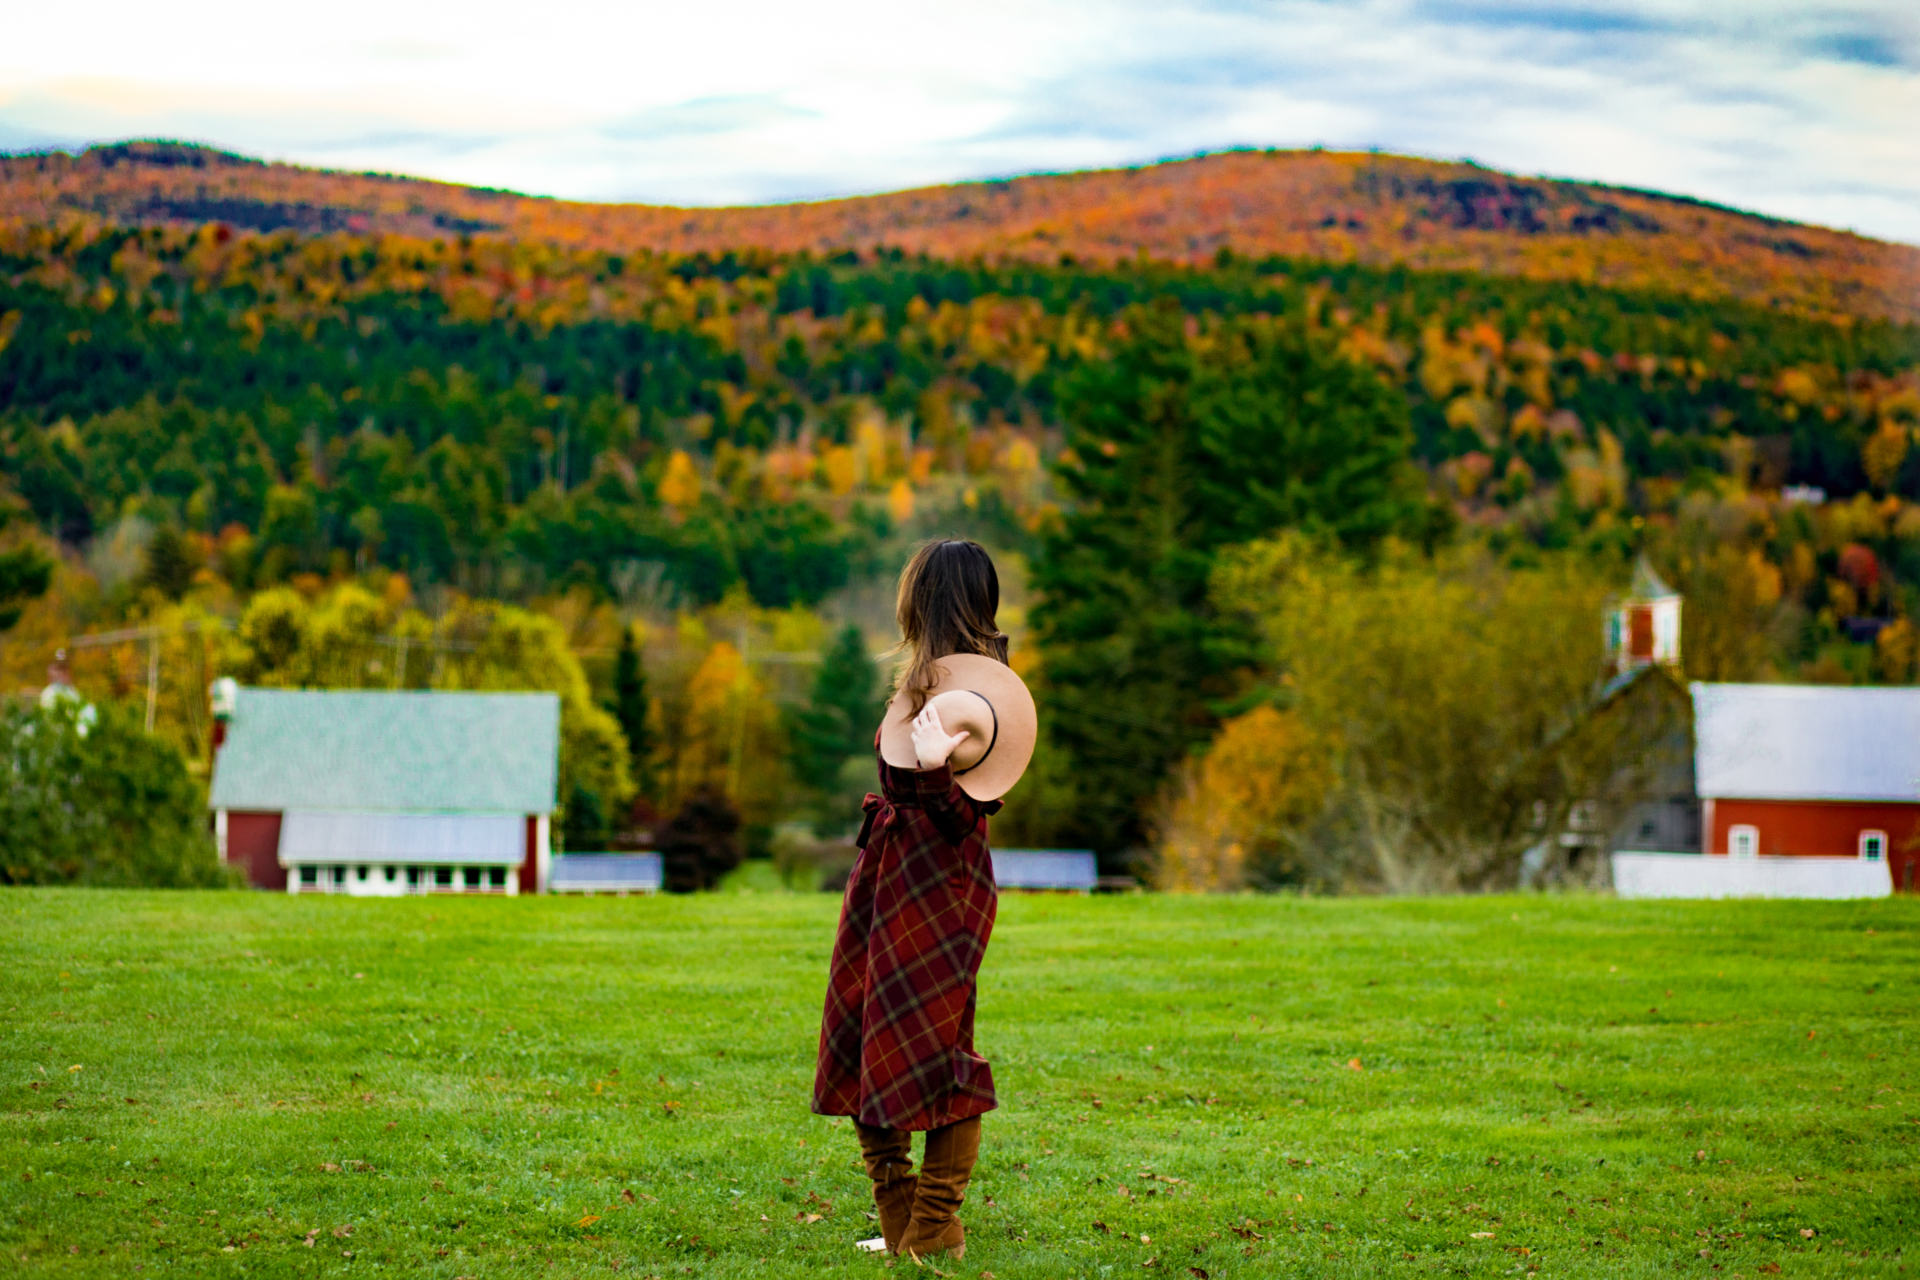 Top 5 Scenic Drives in Vermont This Fall by top US travel blogger, Shannon Shipman